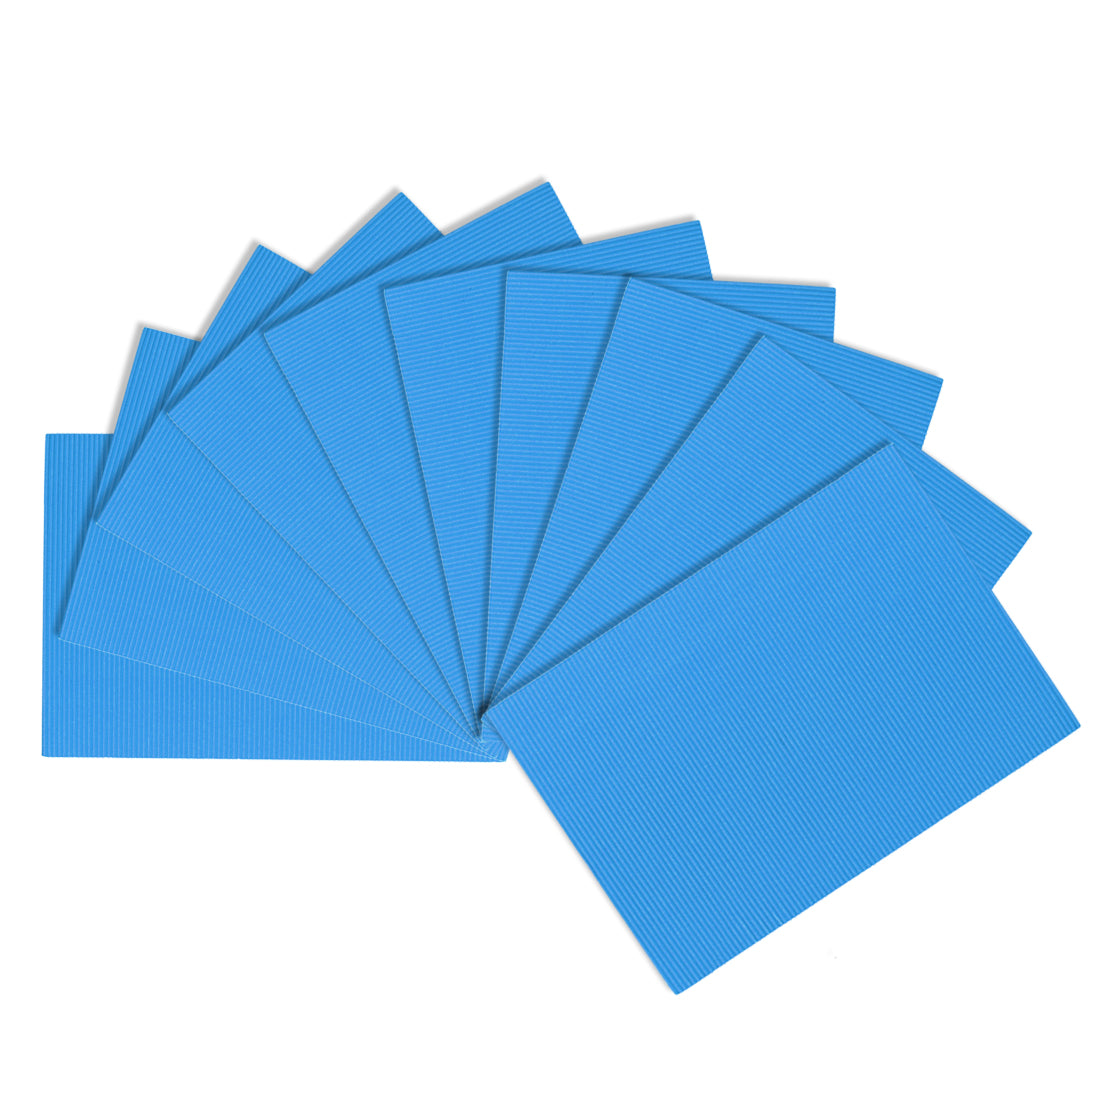 uxcell Uxcell 10pcs Corrugated Cardboard Paper Sheets,Light Blue,7.87-inch  x 11.90-inch